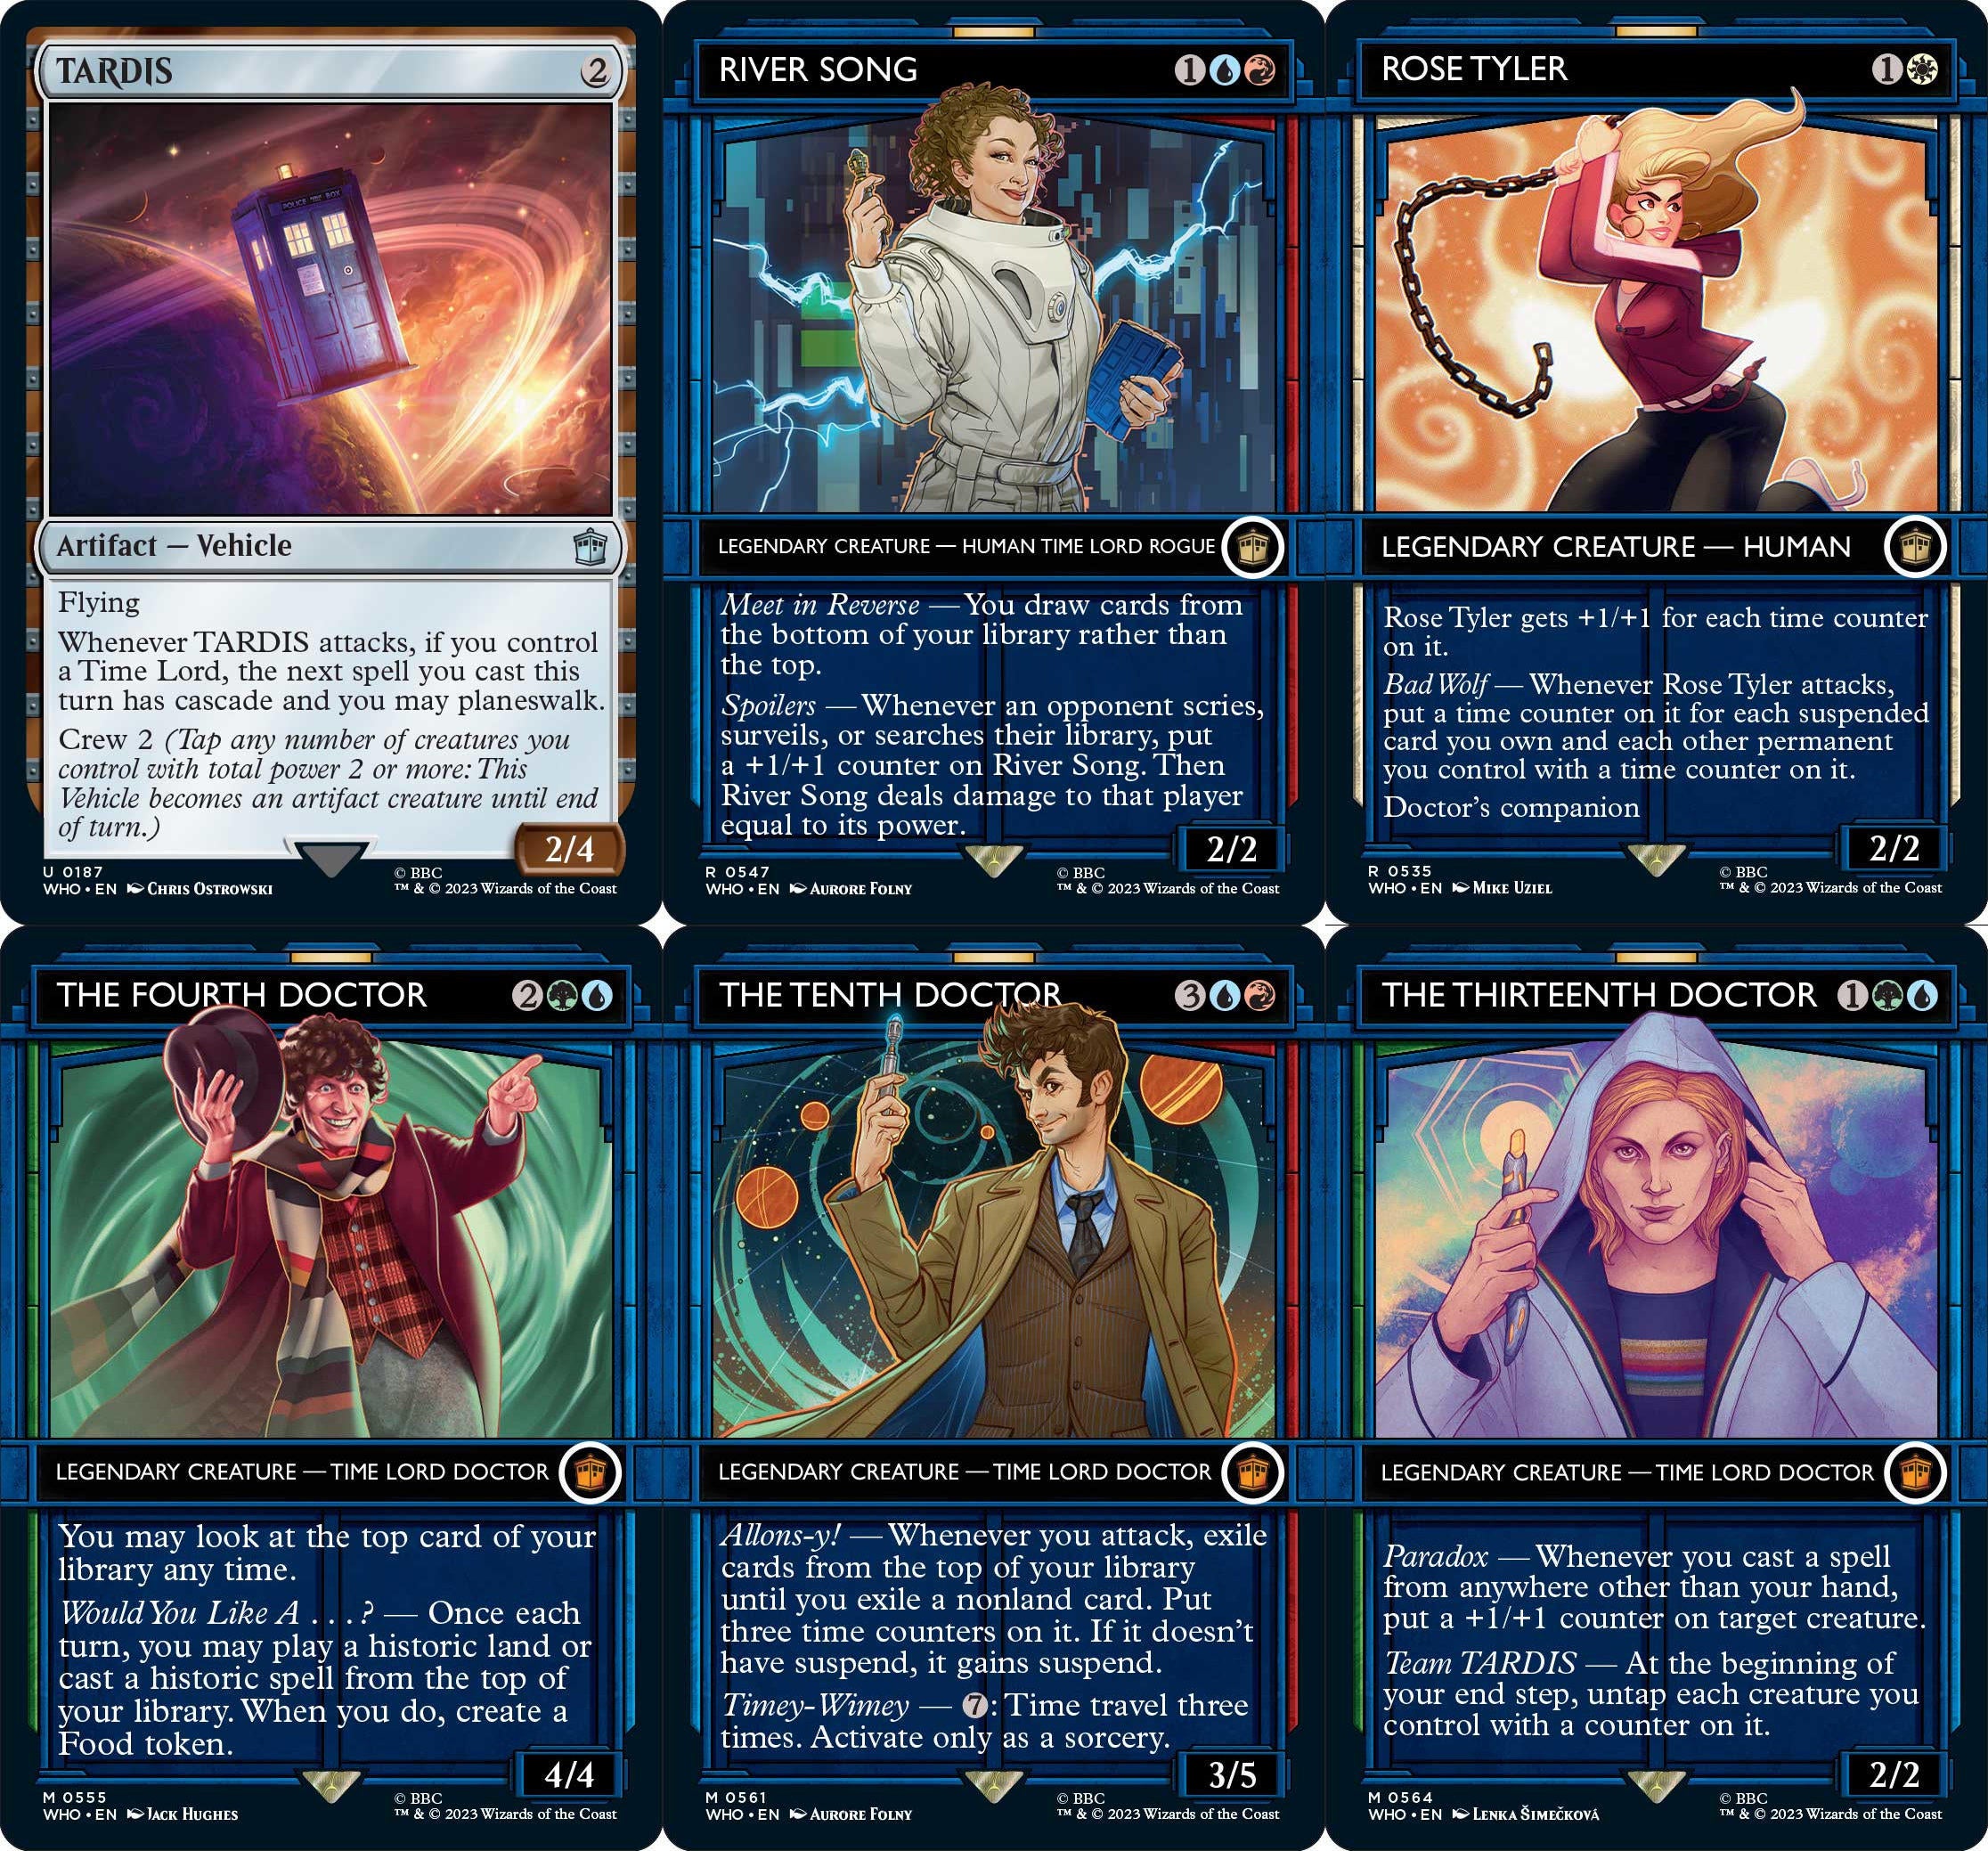 Magic: The Gathering Doctor Who Card List (Updated)